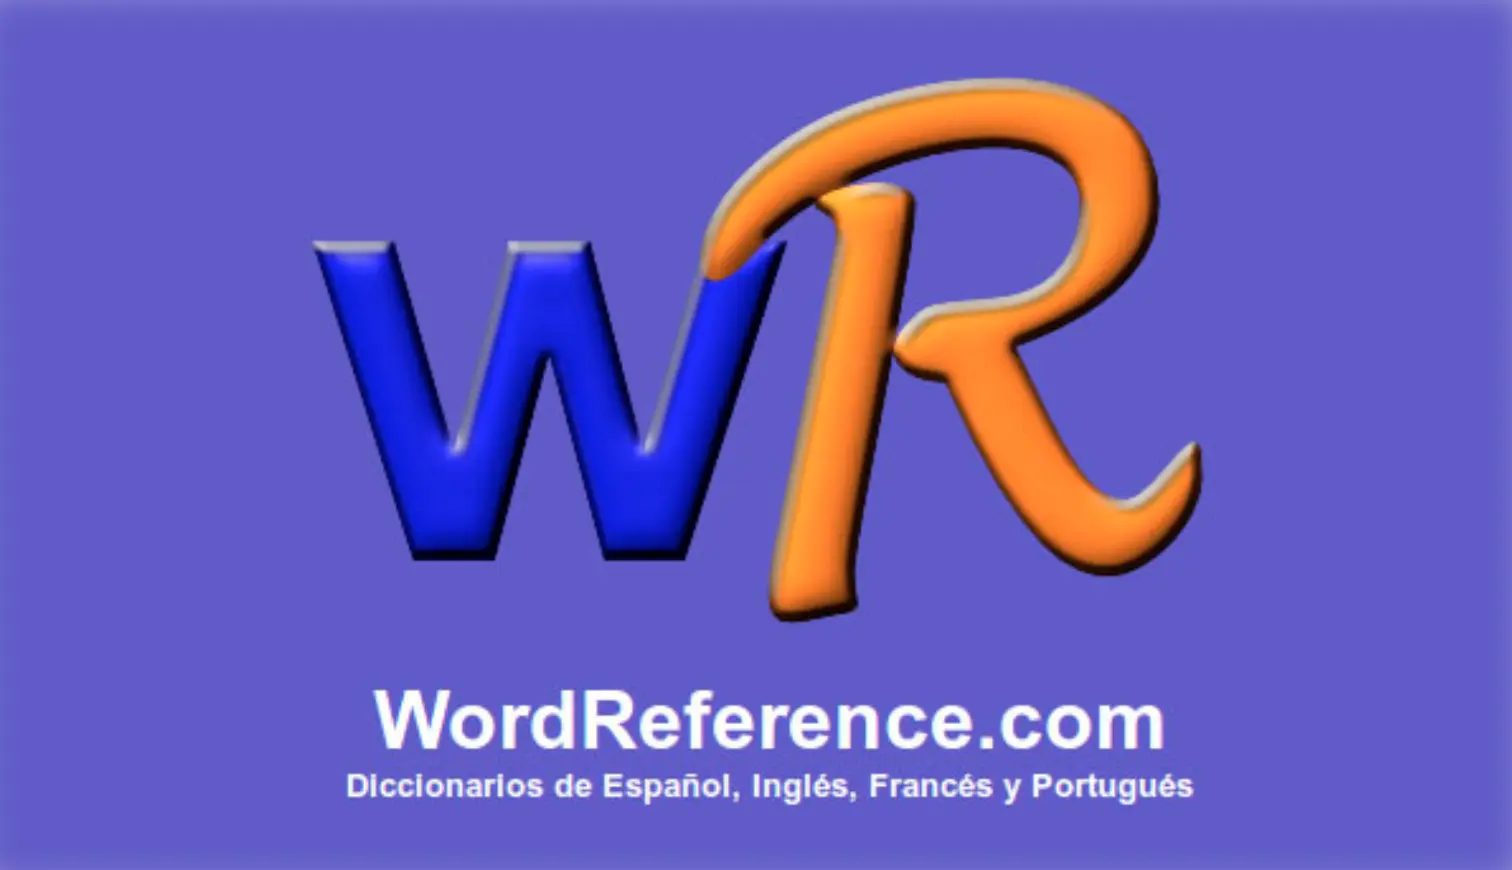 online dictionary WordReference